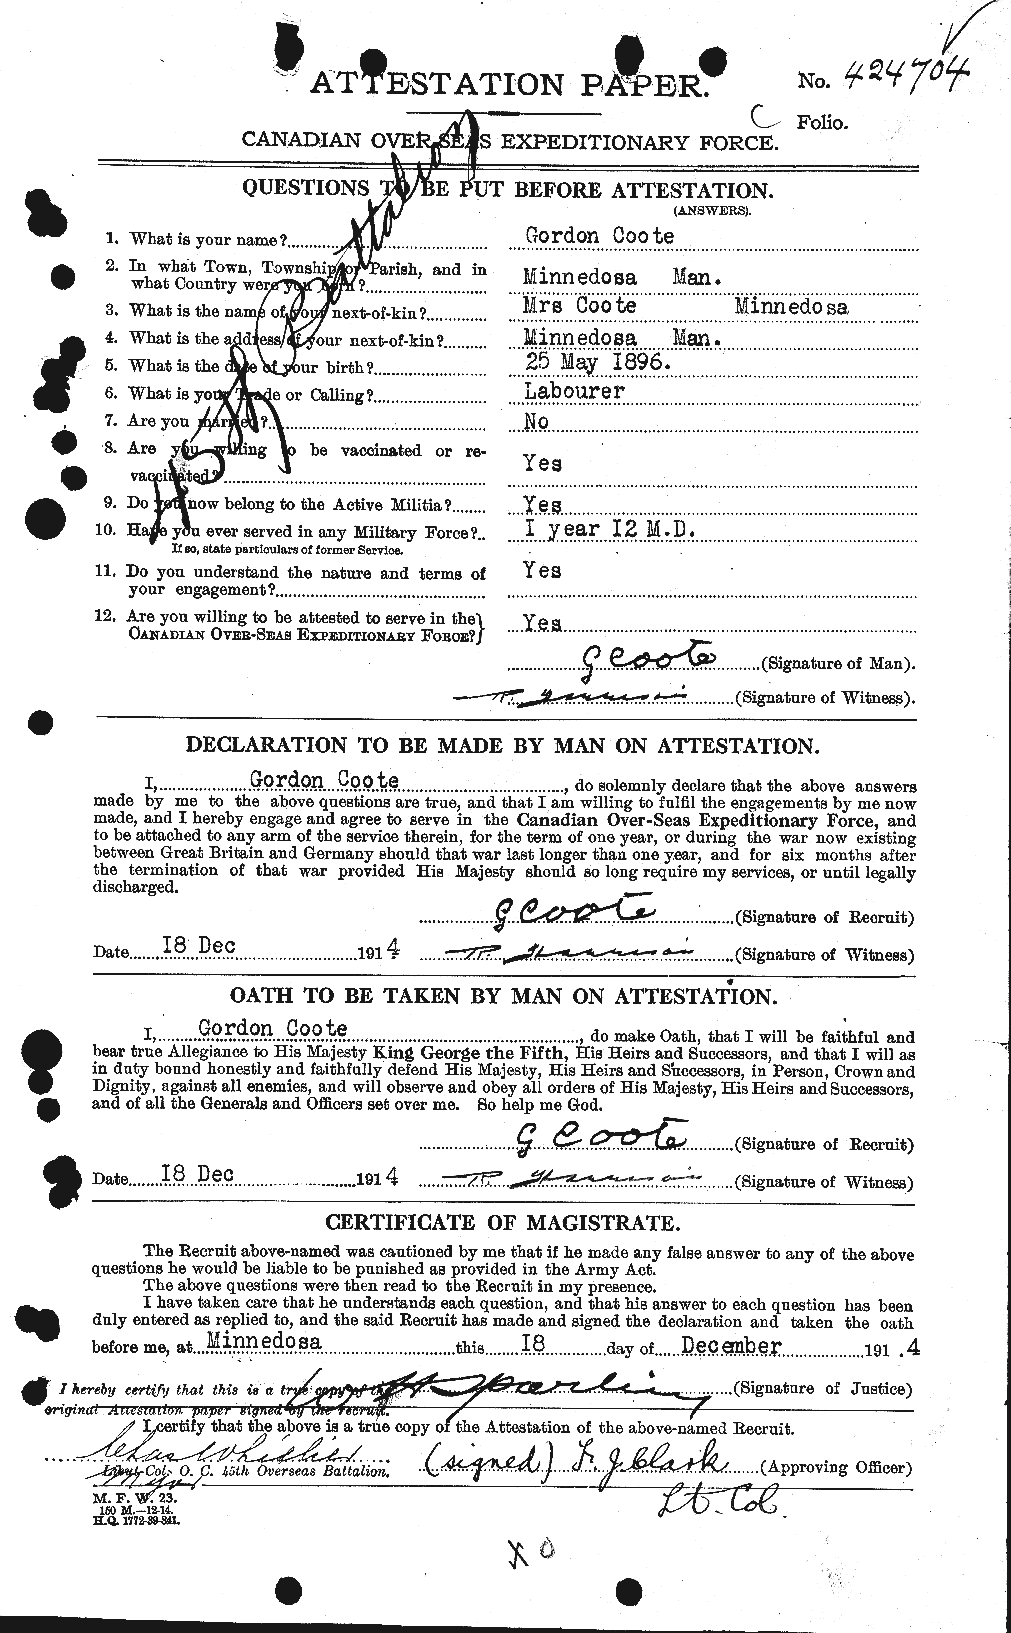 Personnel Records of the First World War - CEF 057508a